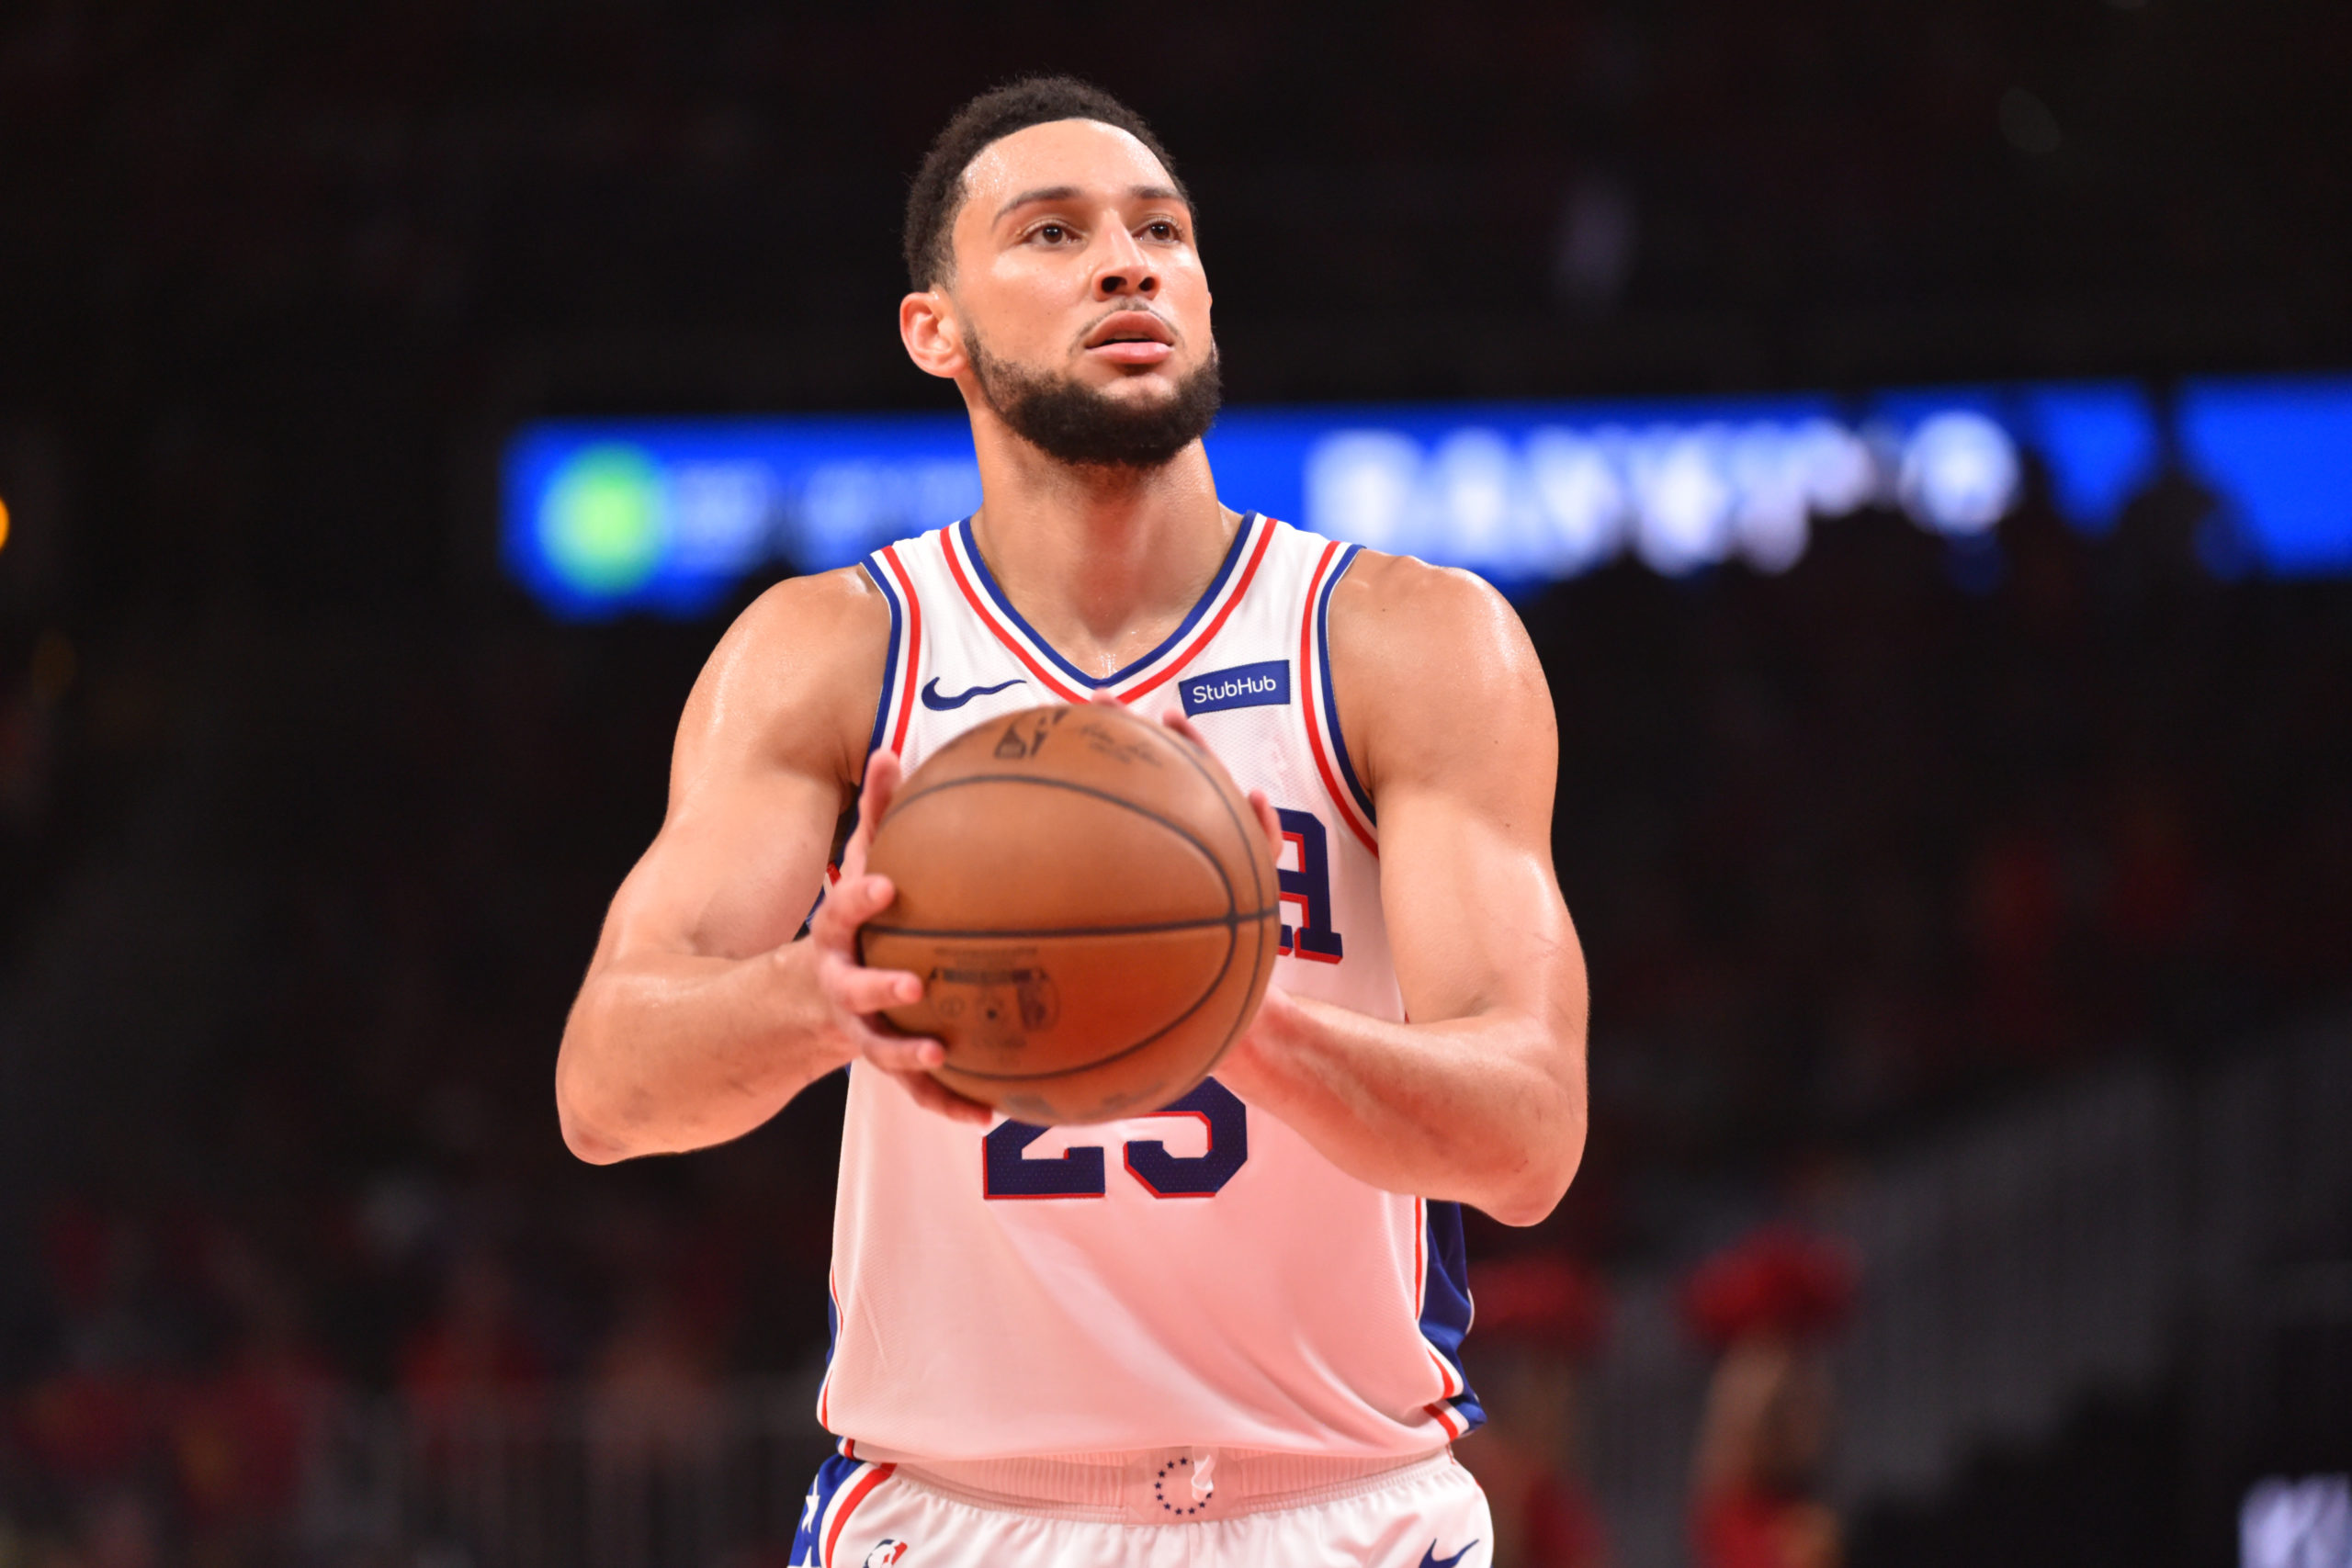 Ben Simmons’ HS Coach Believes 76ers Star’s Shooting Struggles Are ‘Mental’